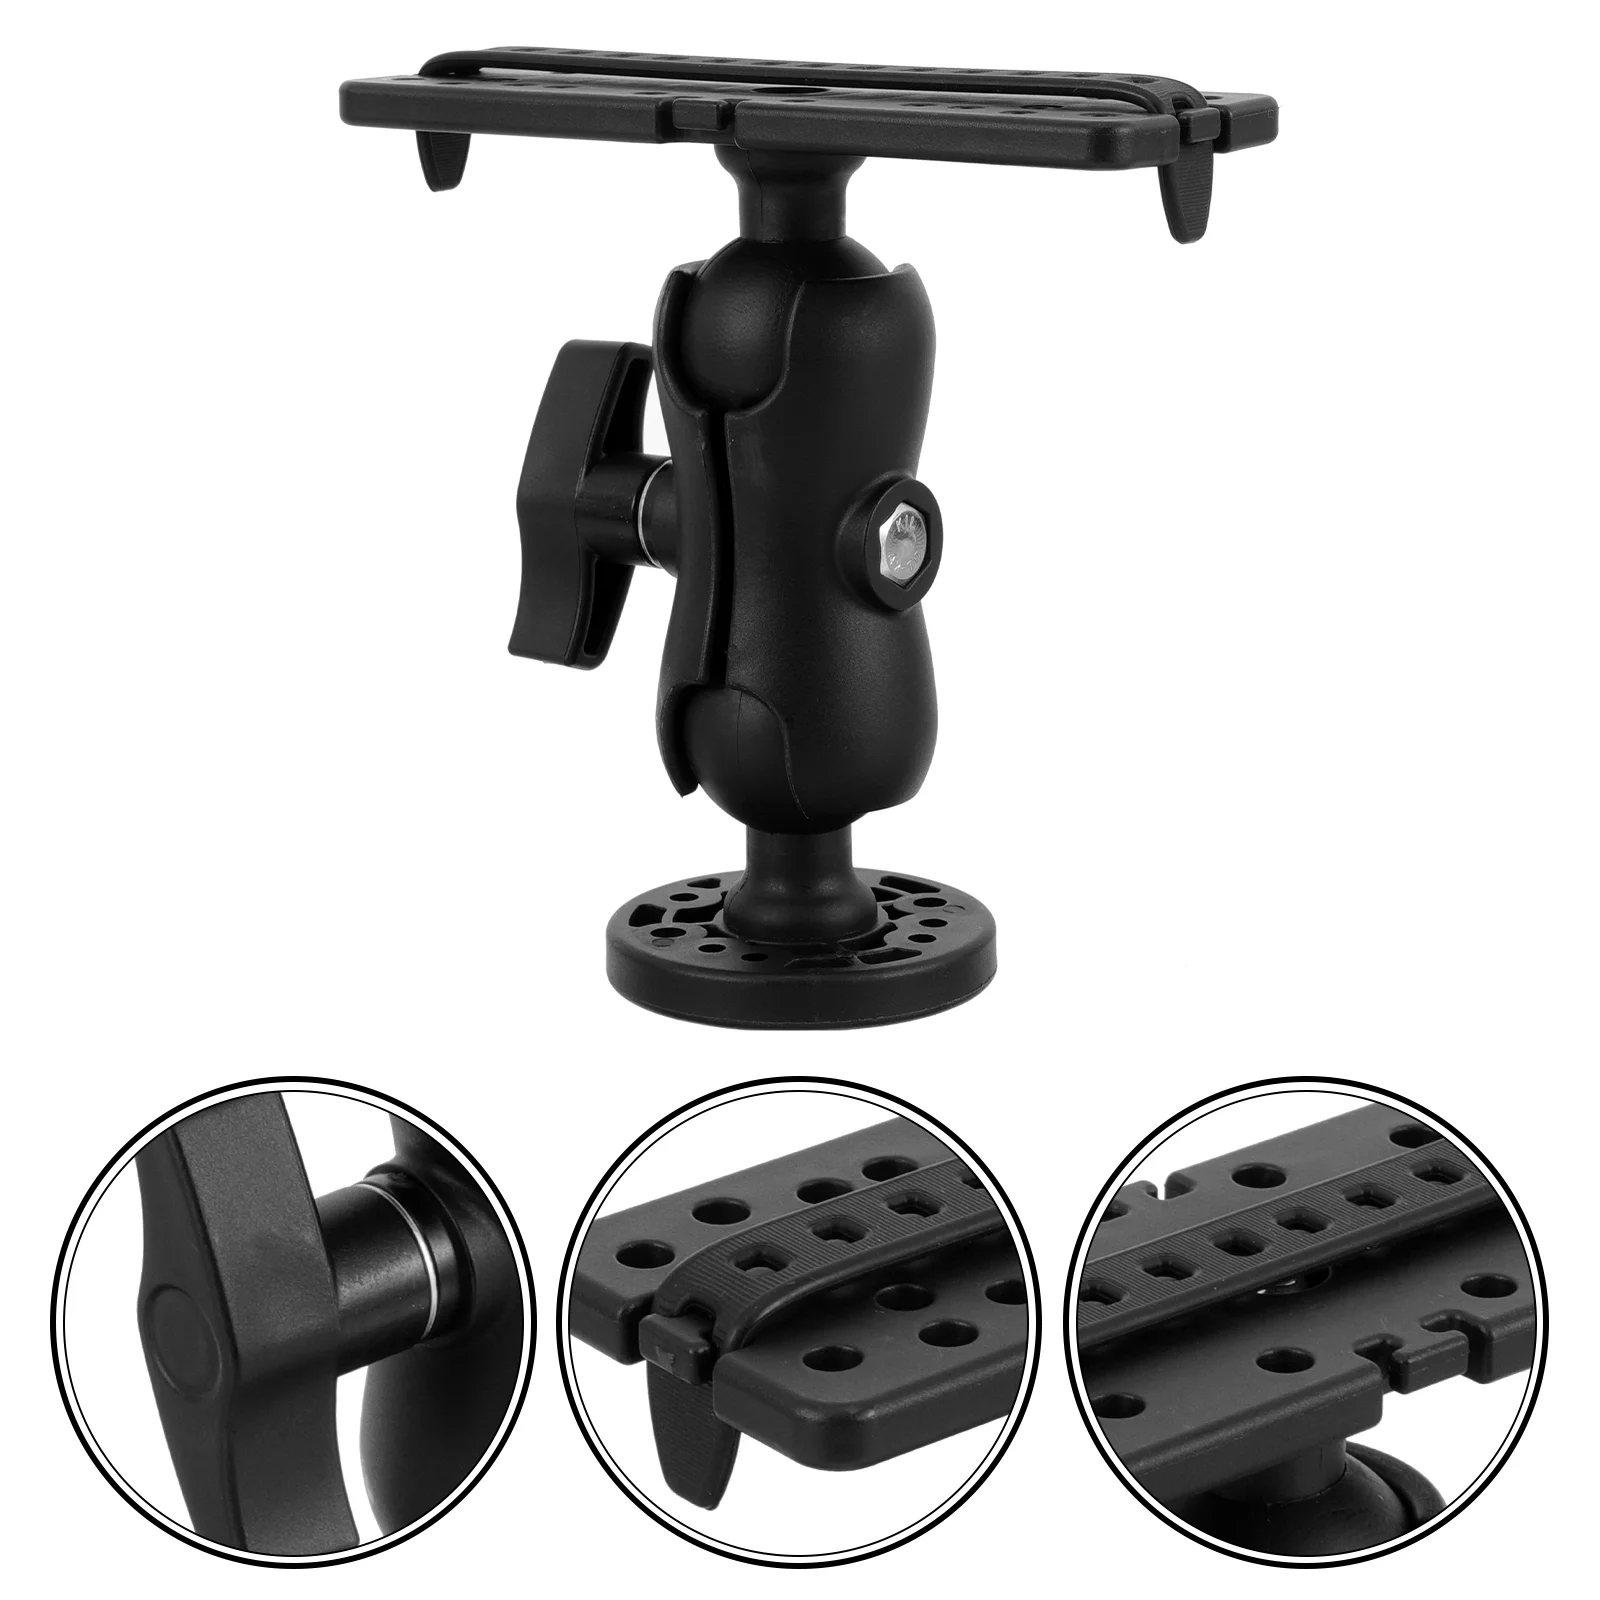 Durable Fish Finder Mount Nylon Marine Fishfinder Ball-Mount Bracket Holder Fish Finder Rack for Fishing Boat Canoeing Fish acrylic basketball display stand rack base mount bracket for soccer volleyball american football rugby ball holder supports